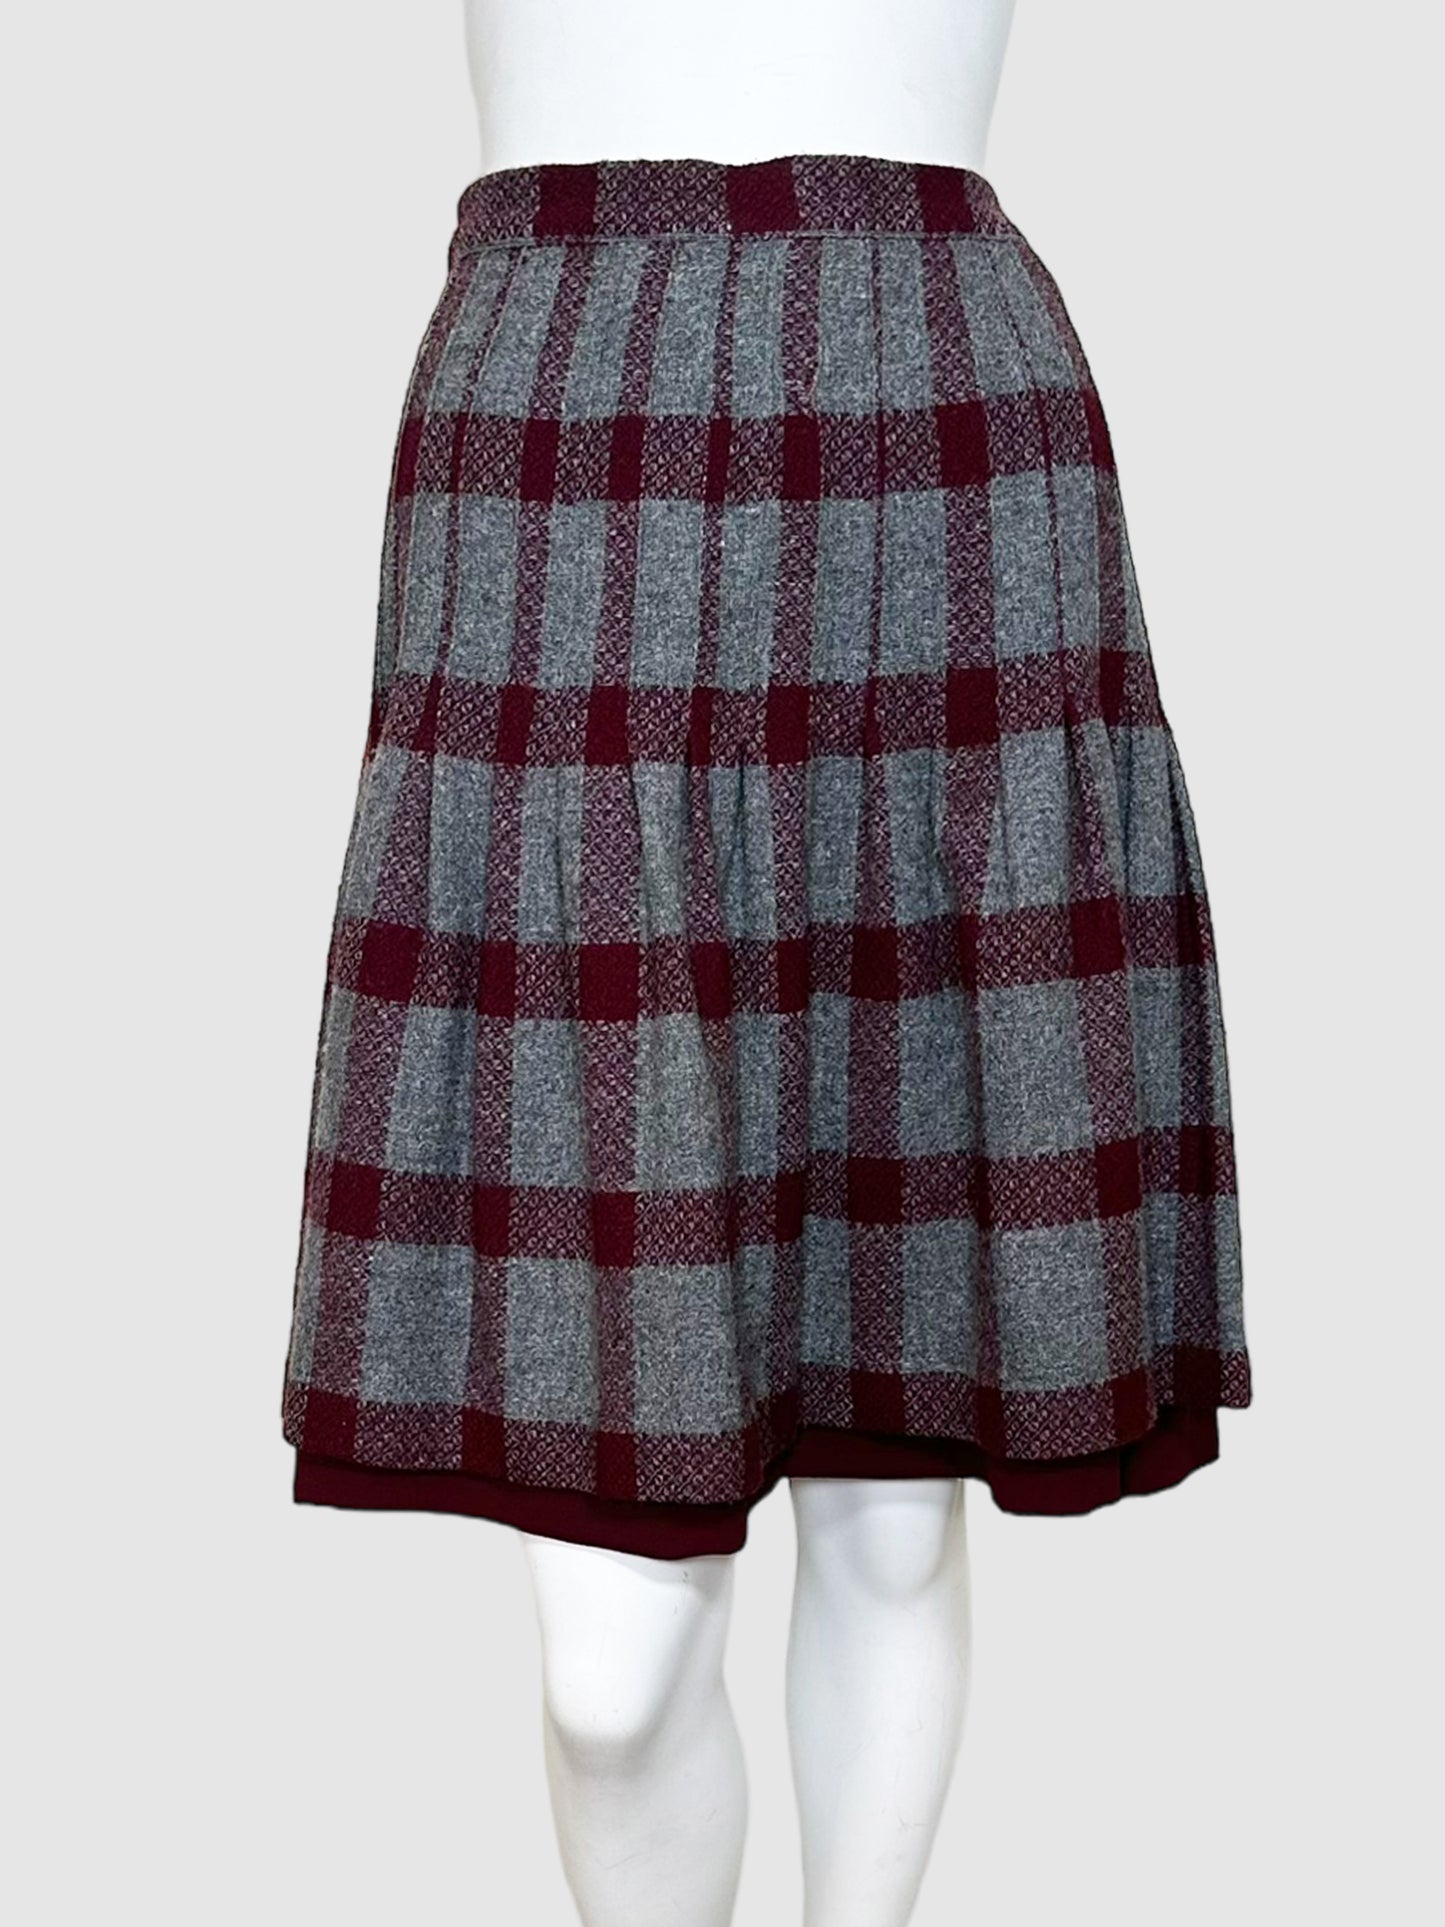 Valentino Boutique Plaid Pleated Skirt - Size 10